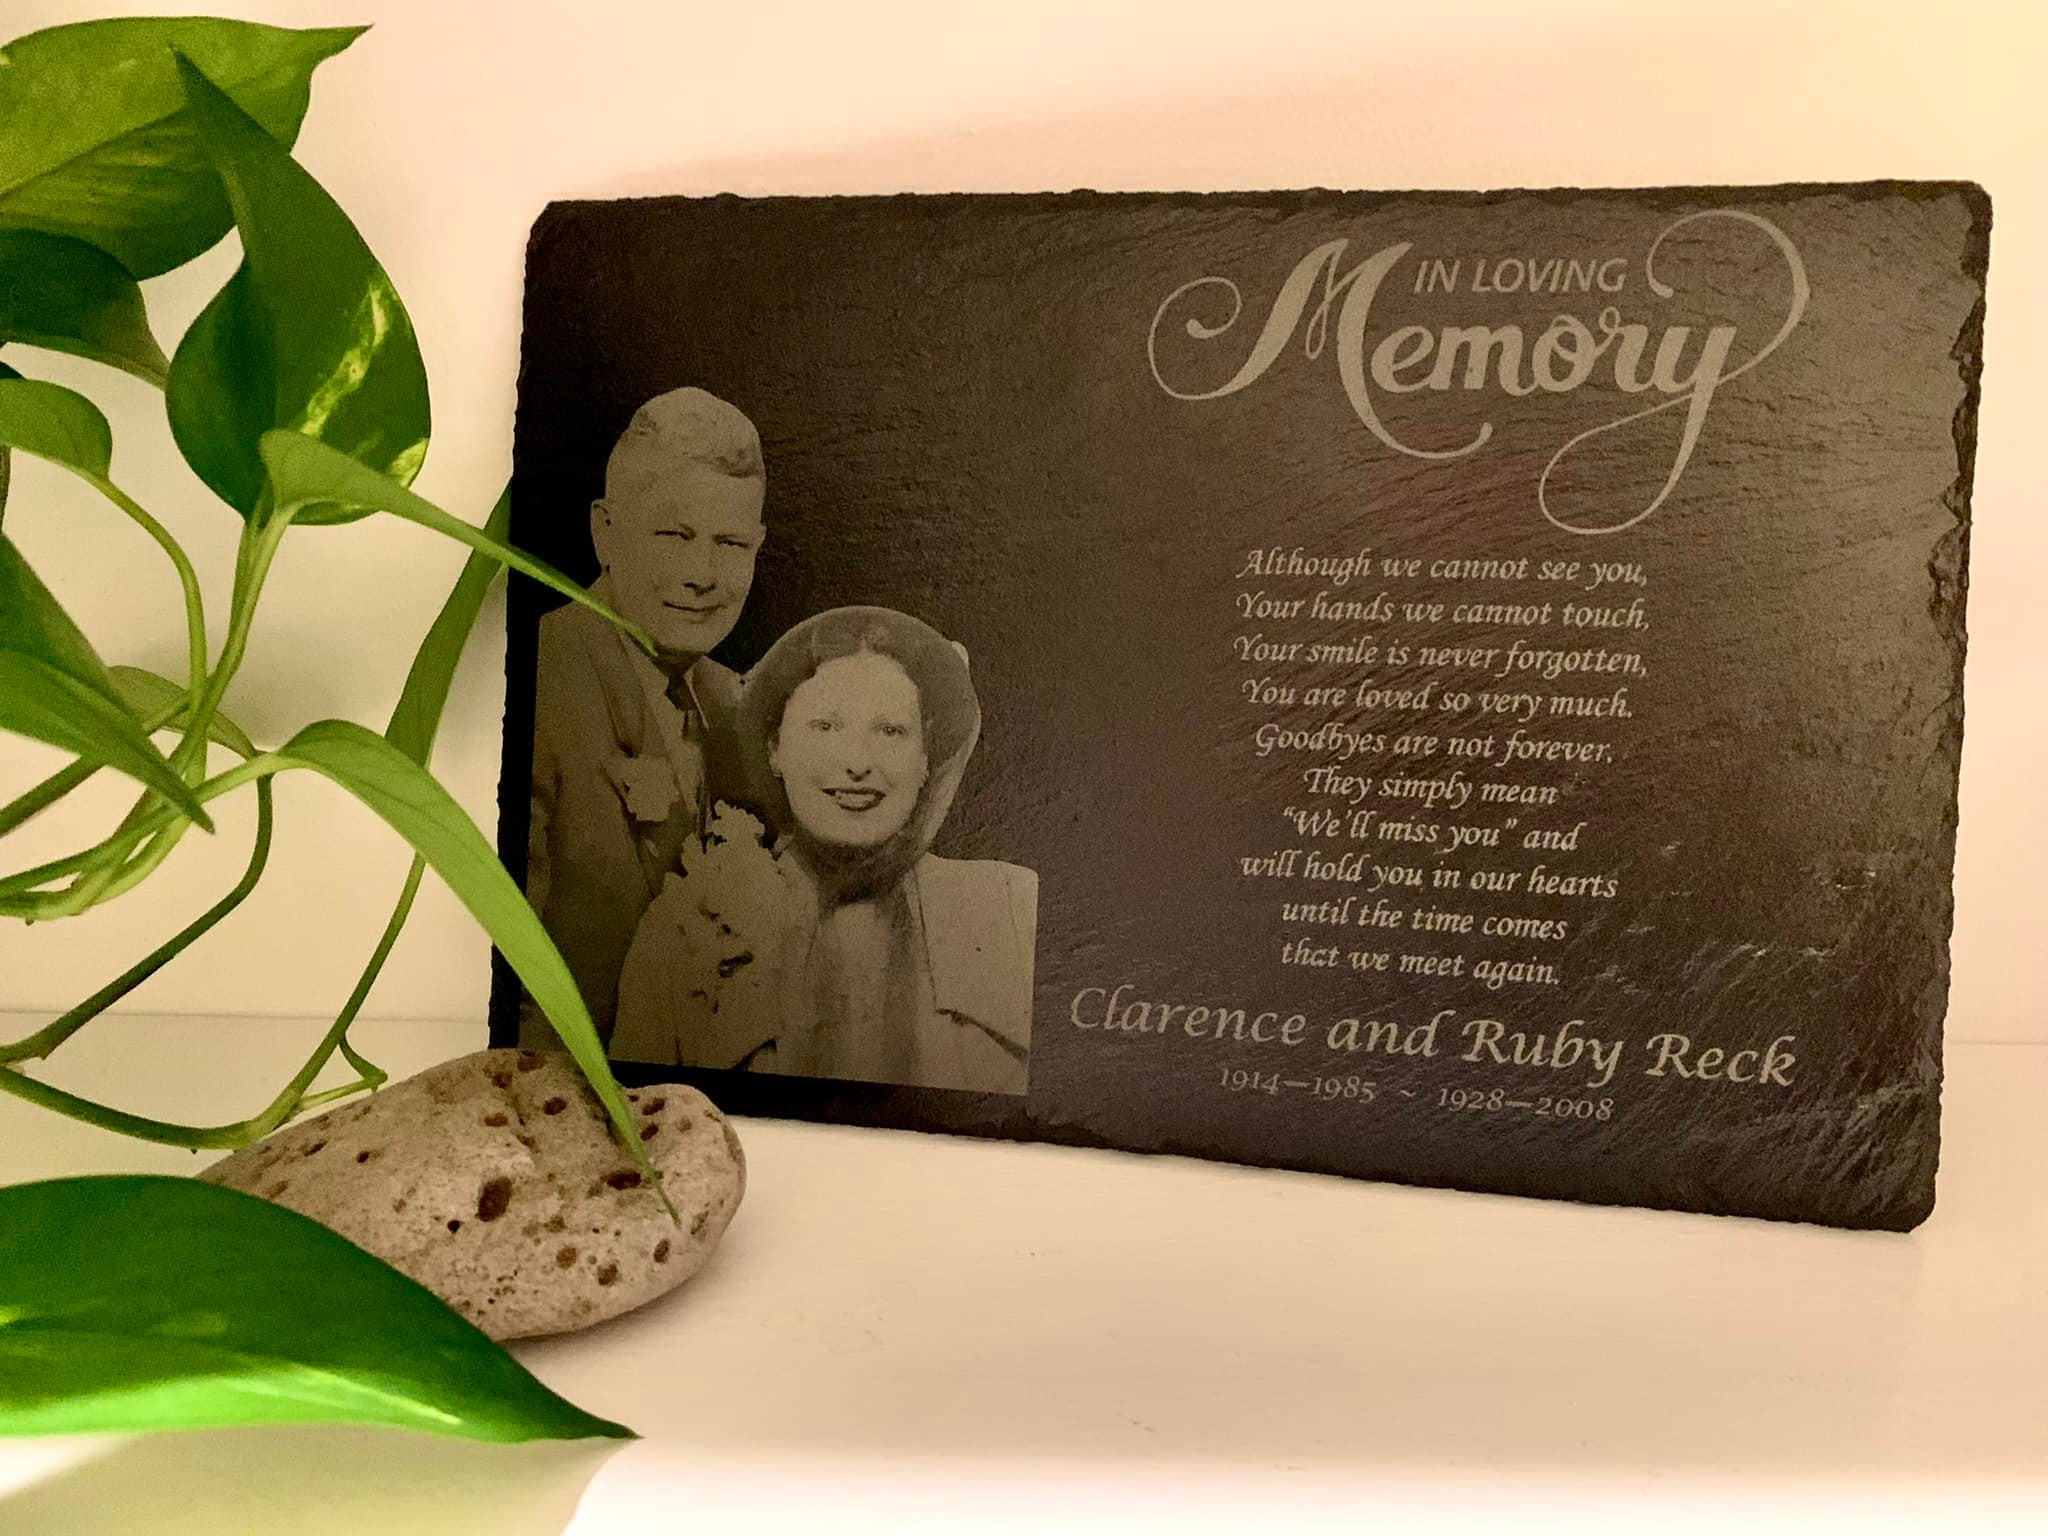 Personalized Engraved Memorial Plaque 8x12 - Grave Conservation LLC